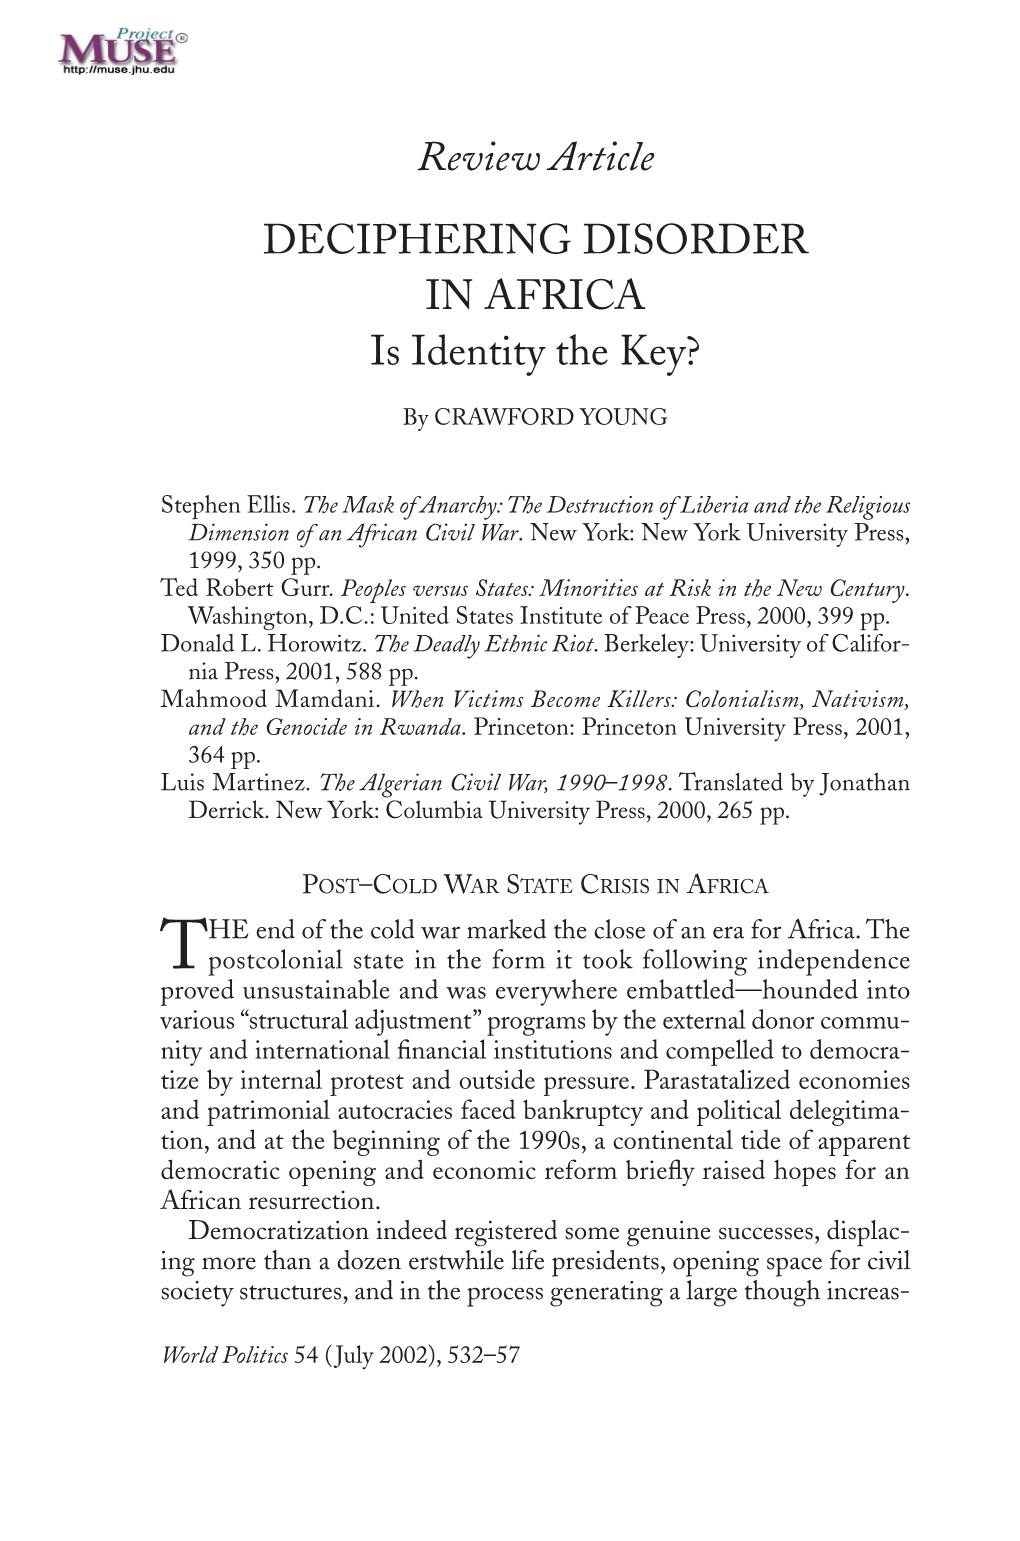 Review Article DECIPHERING DISORDER in AFRICA Is Identity the Key?